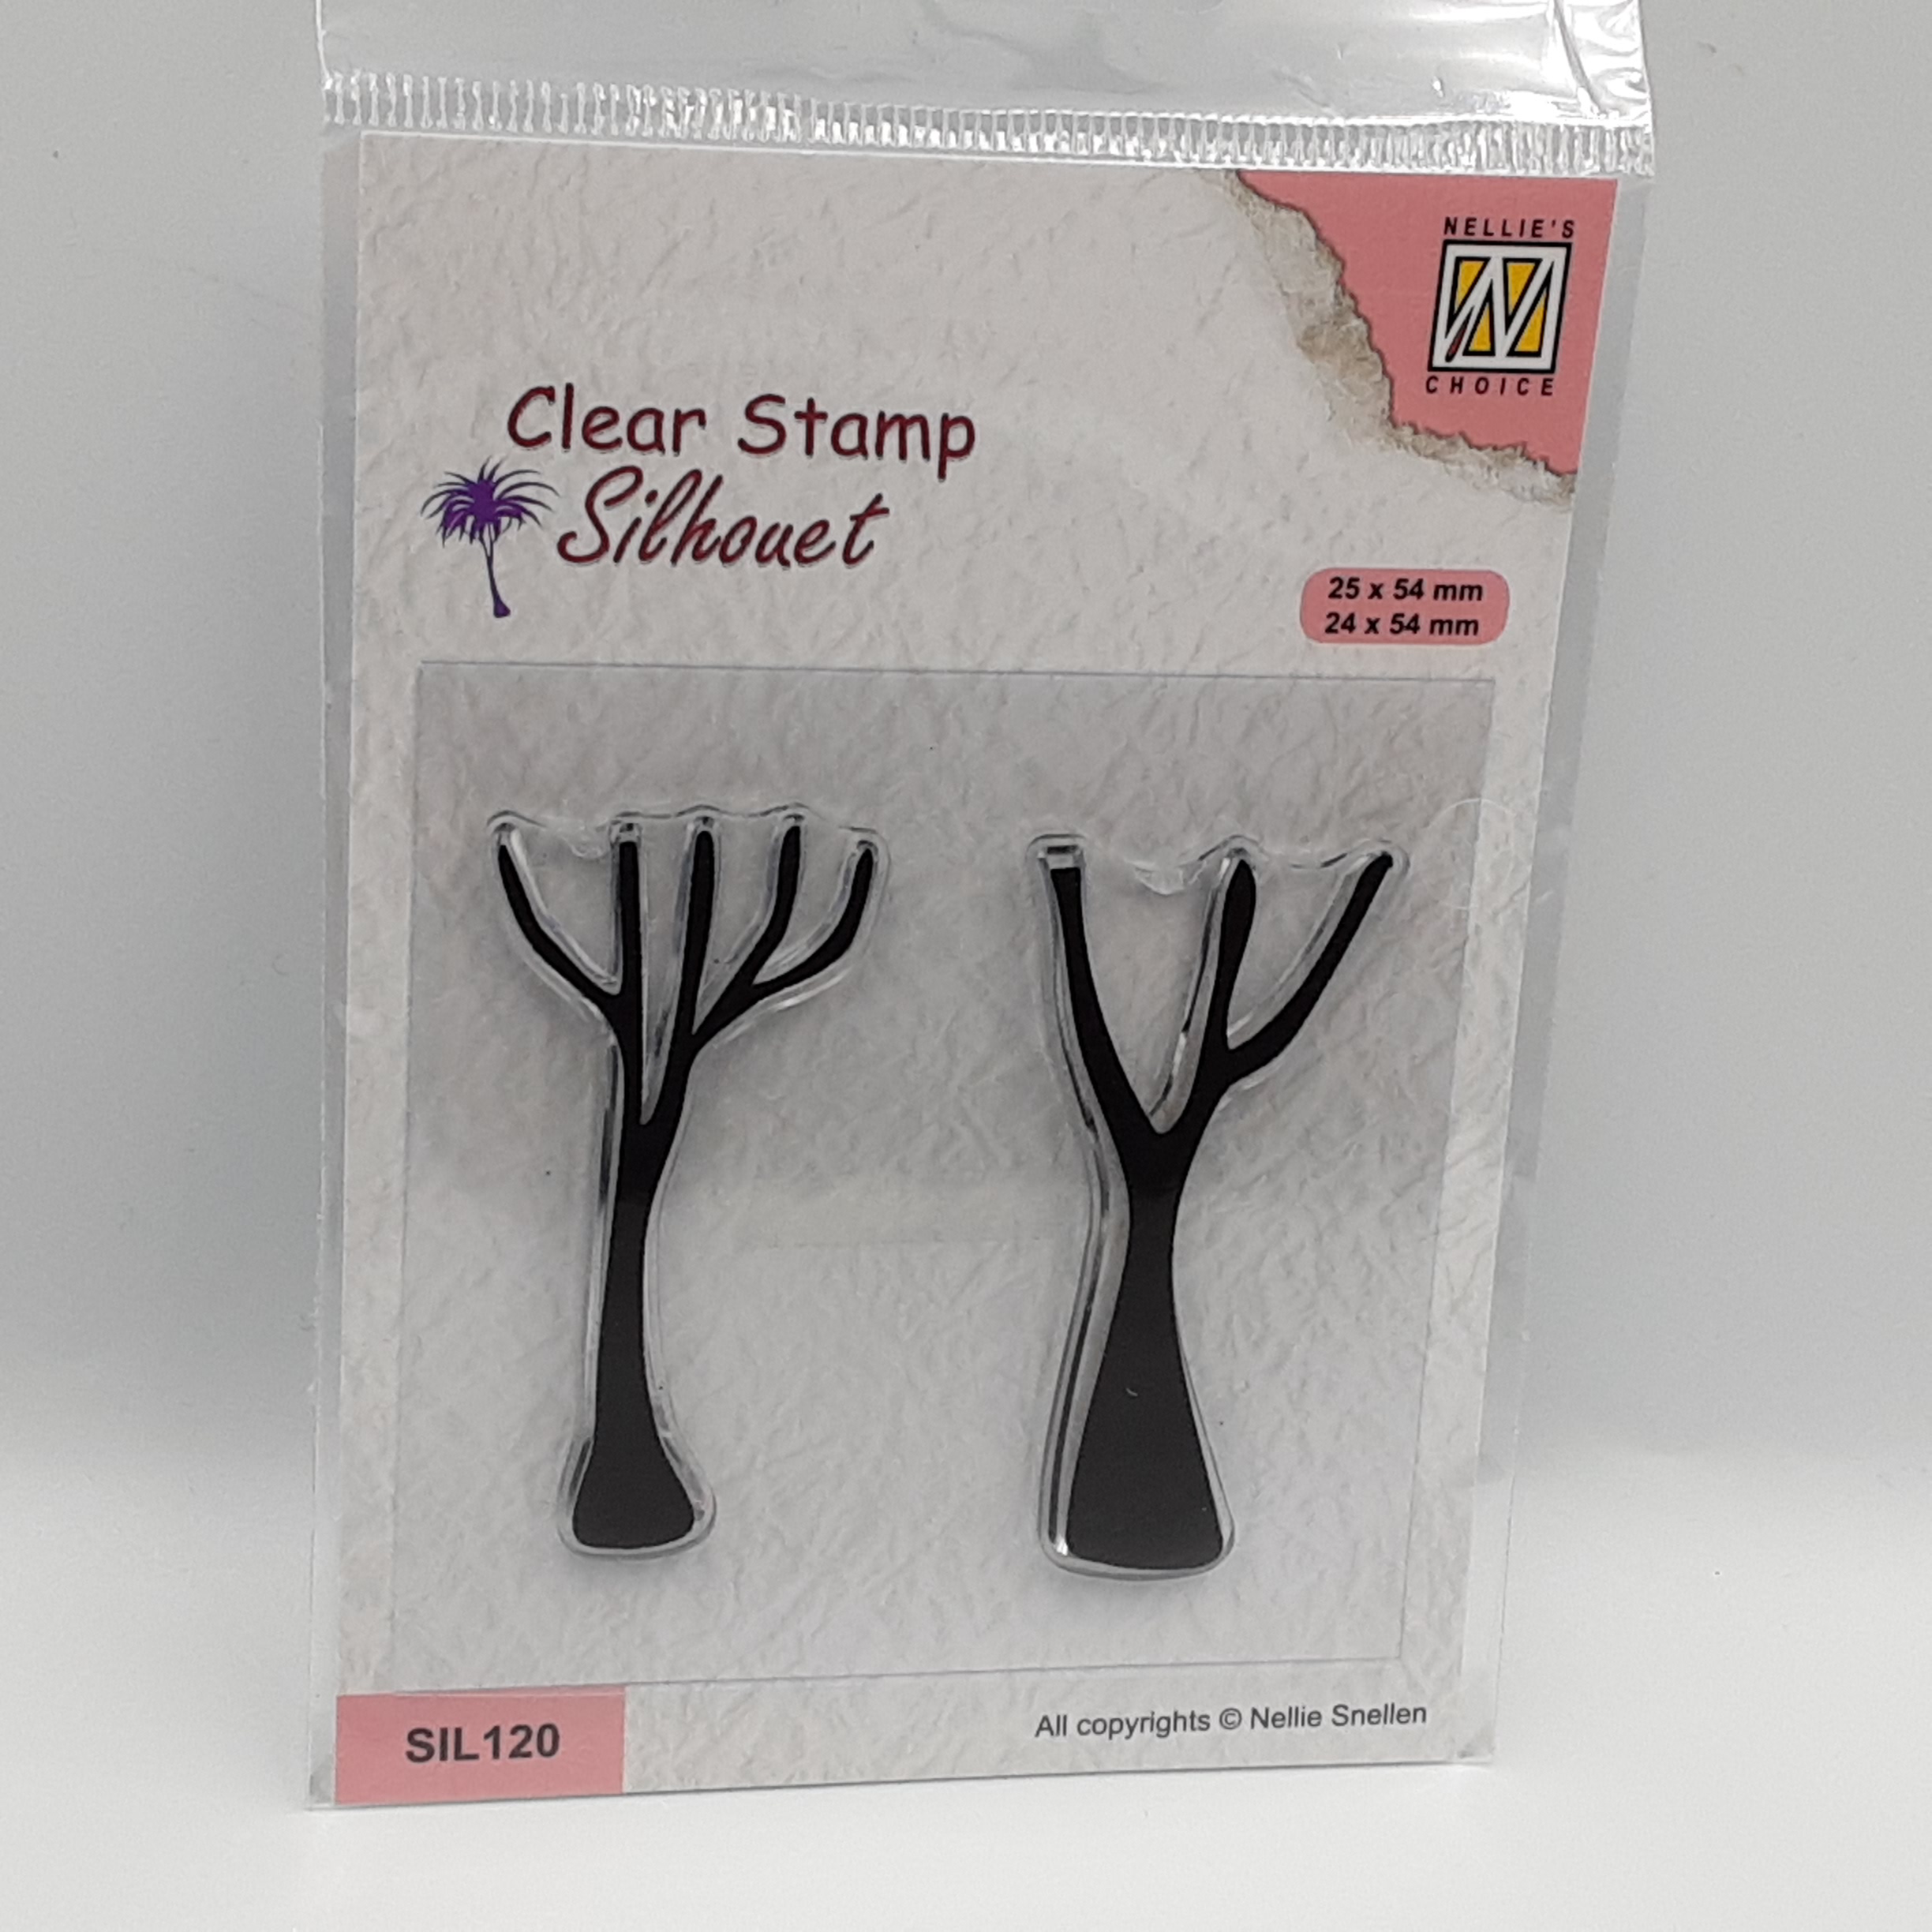 Silhouette tree trunks clear stamp